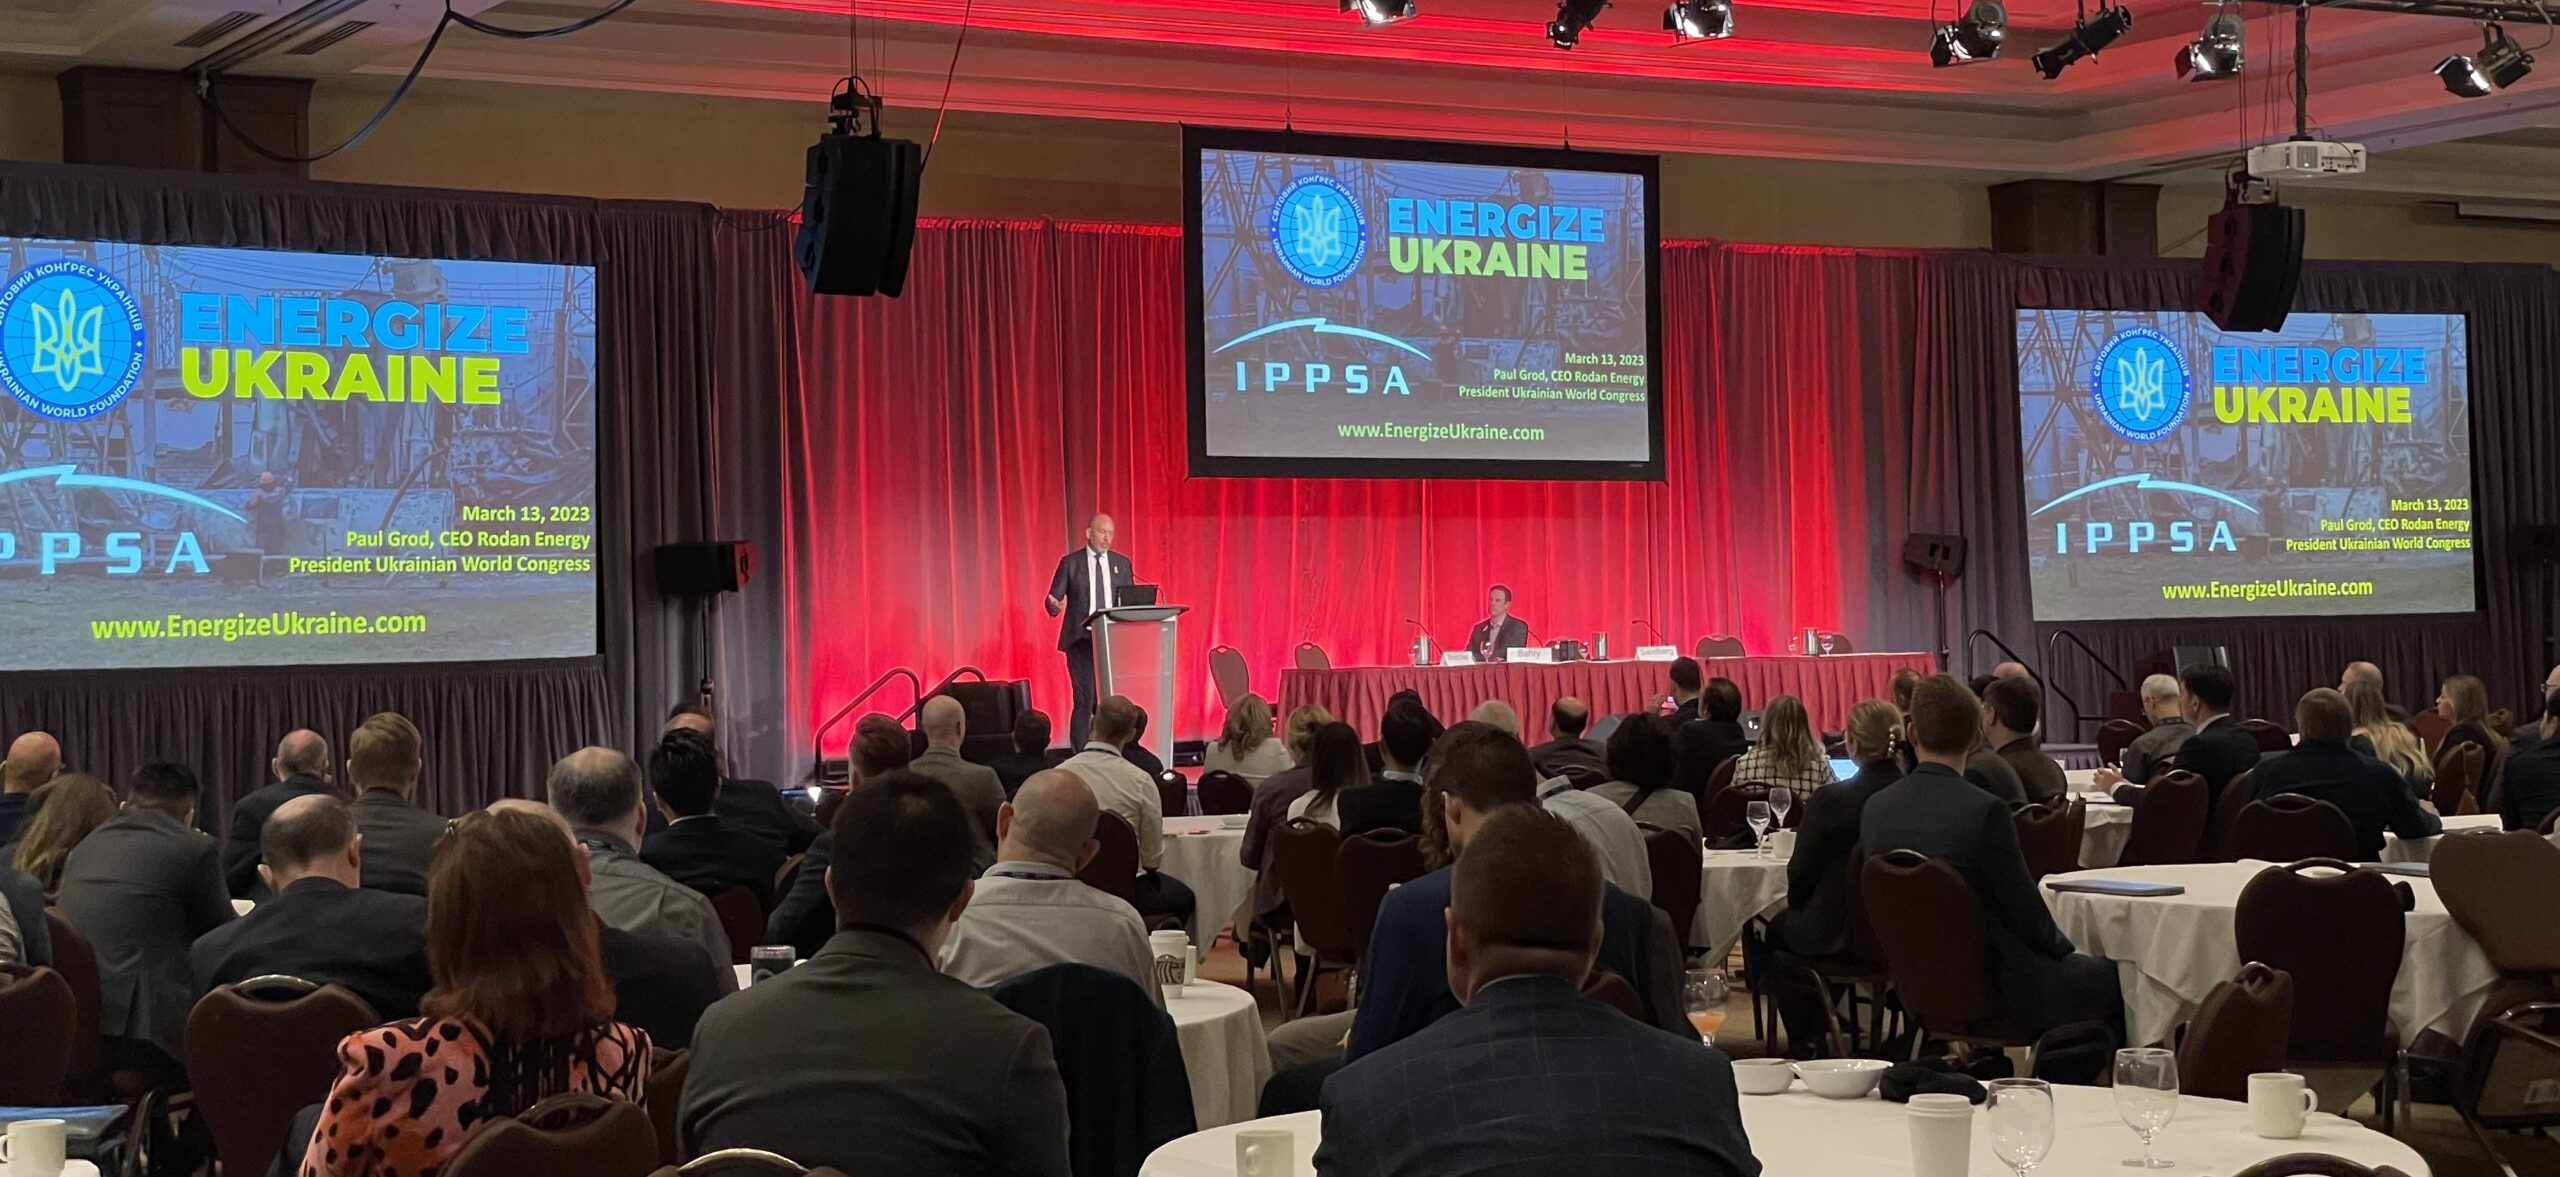 Energize Ukraine presented at the 29th Annual Energy Security Conference in Alberta